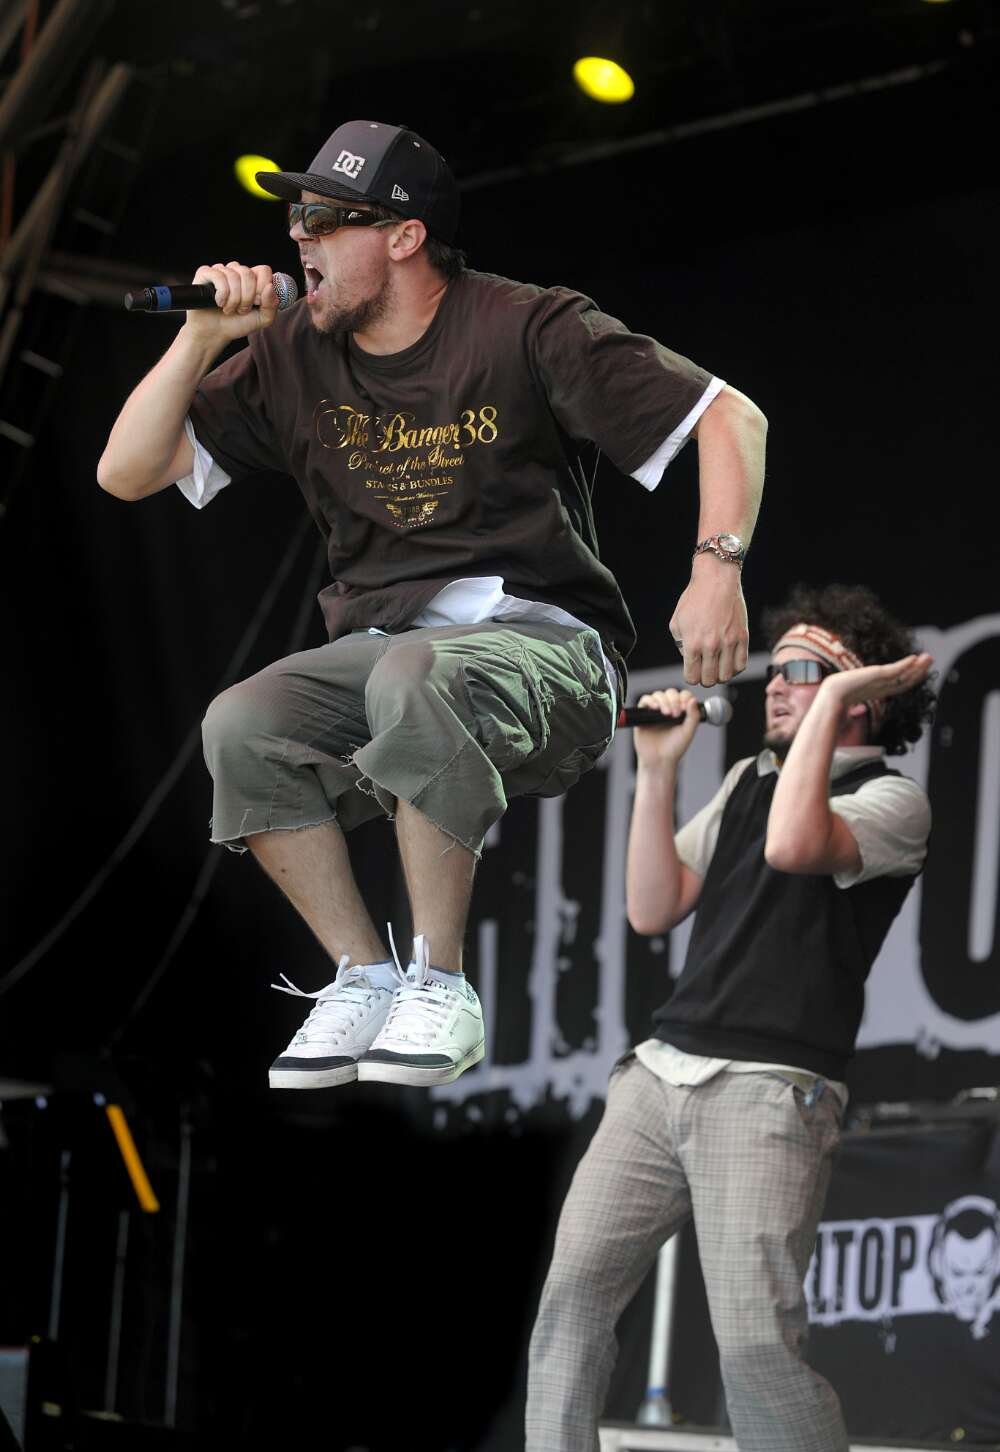 A man in a cap and sunglasses jumps in the air while singing into a microphone